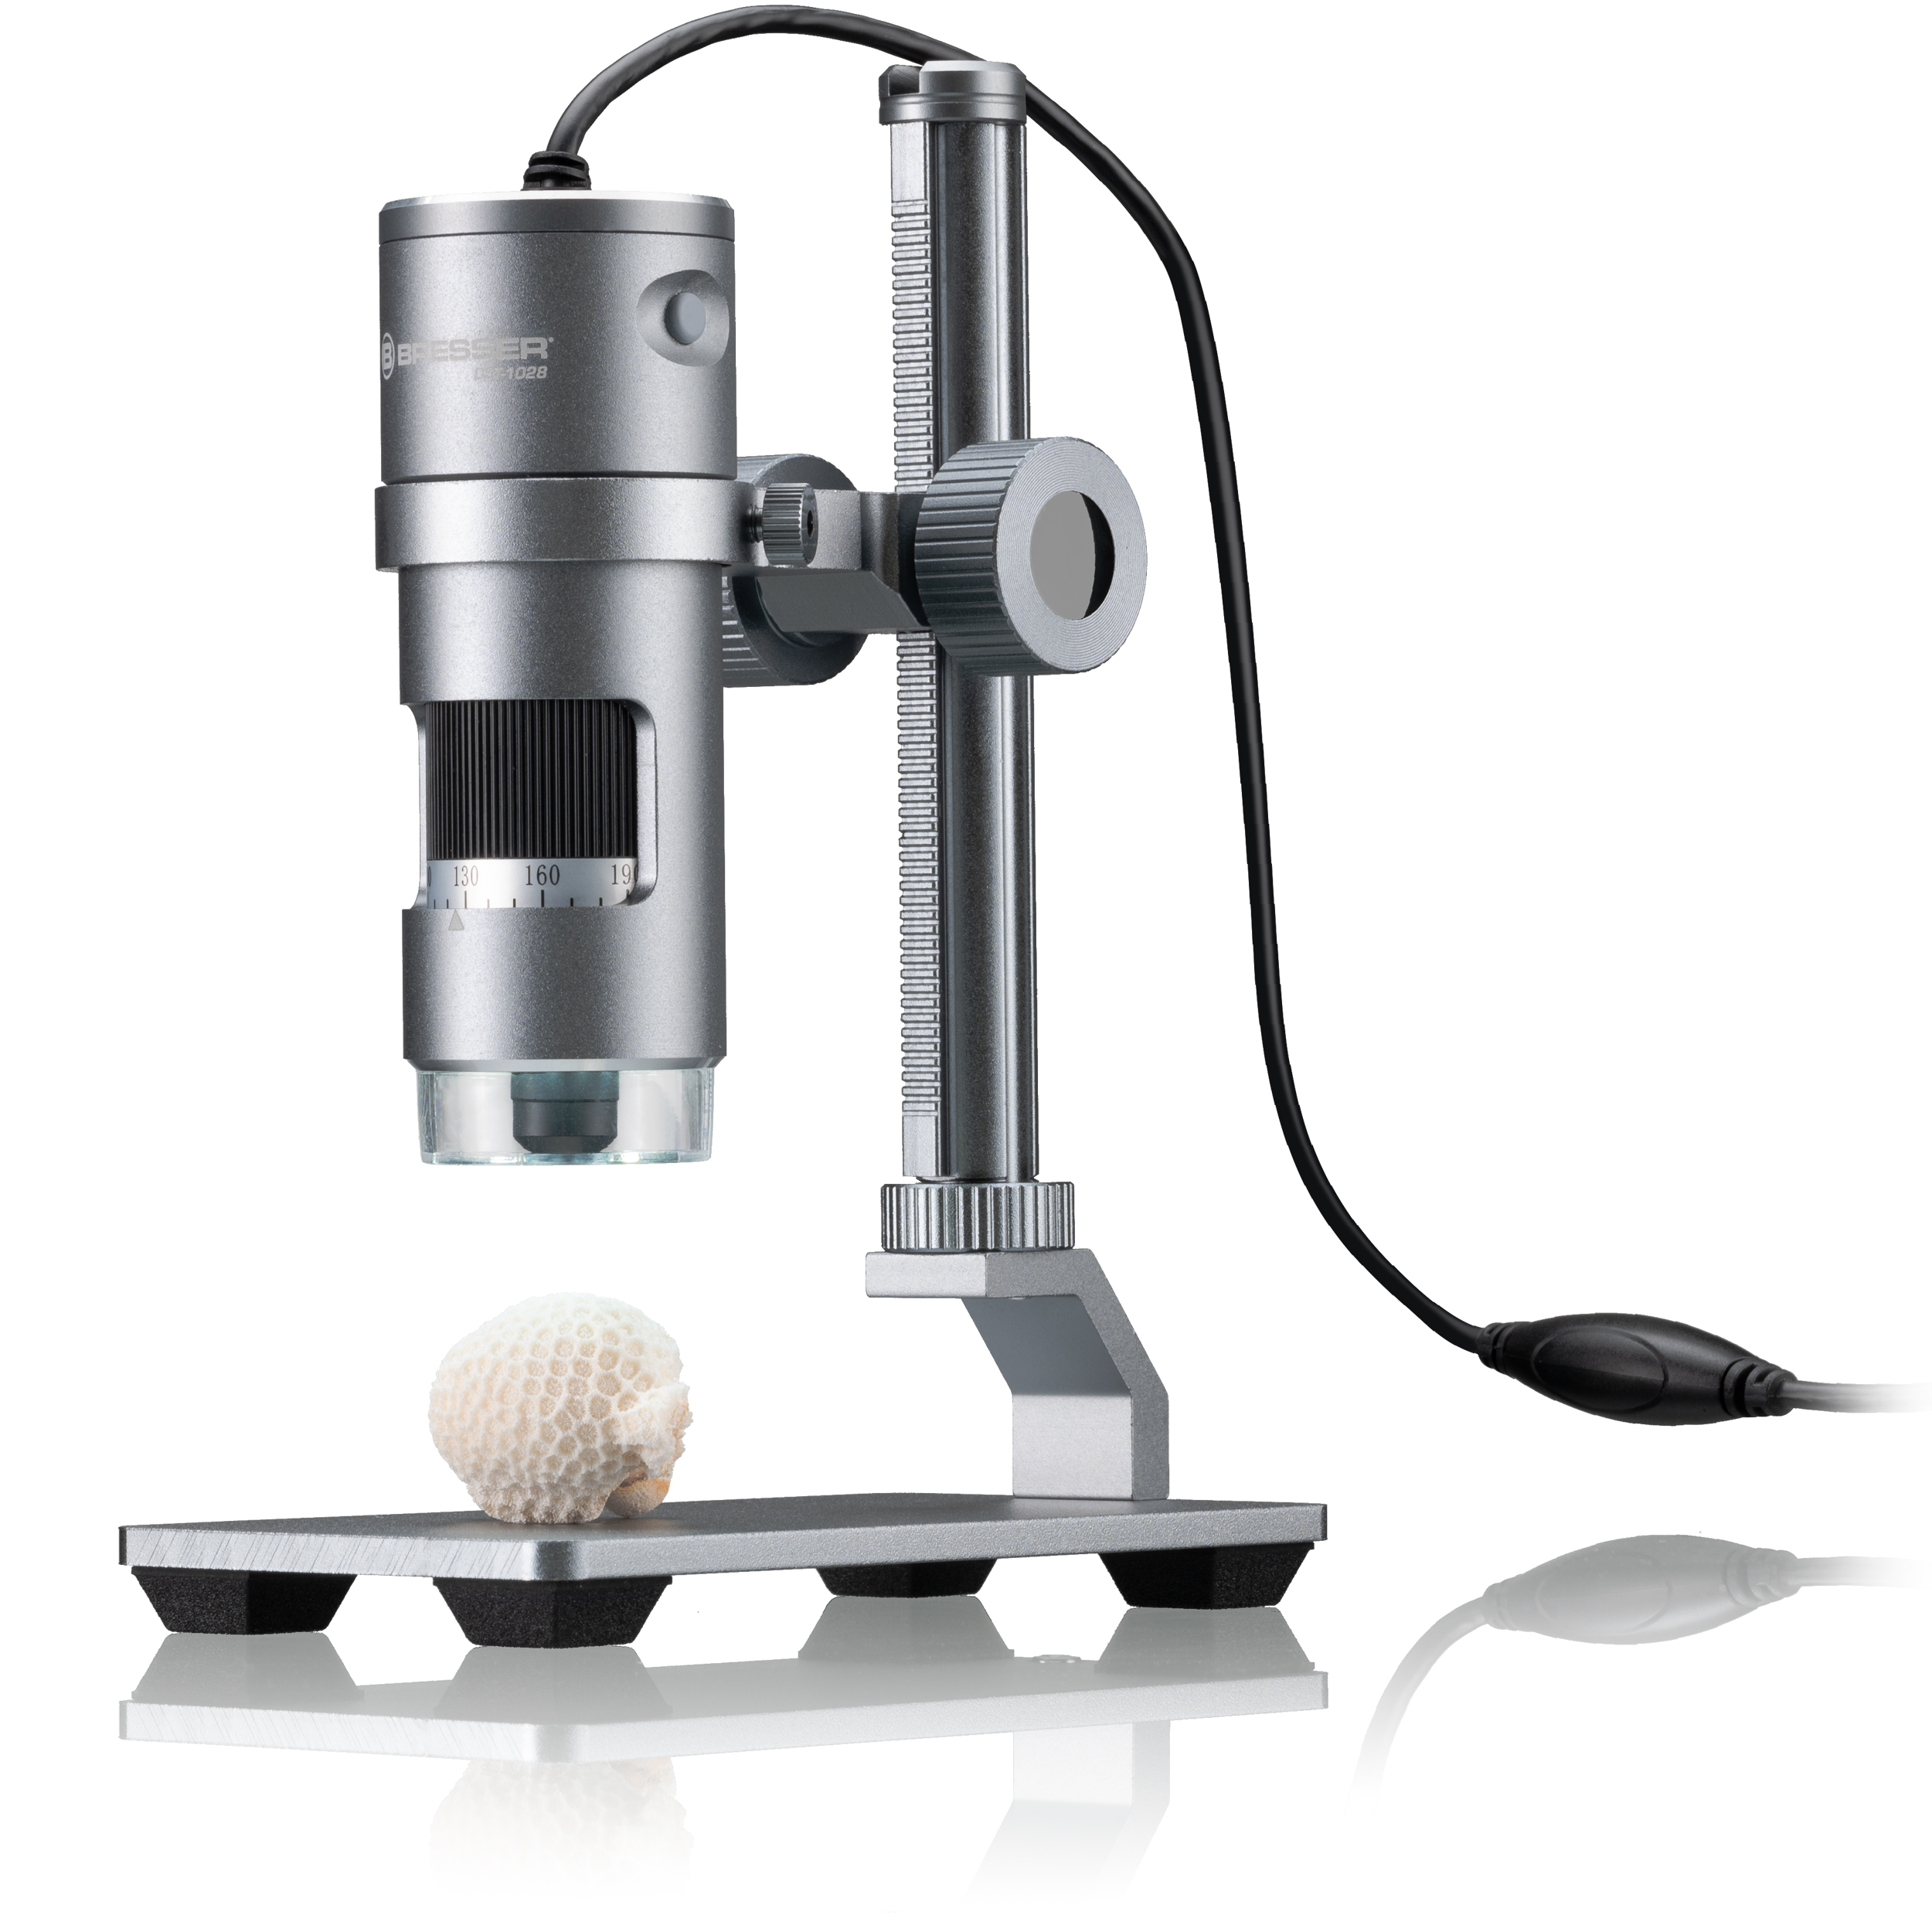 Bresser | digital Microscope DST-1028 5.1MP | Expand Your Horizon